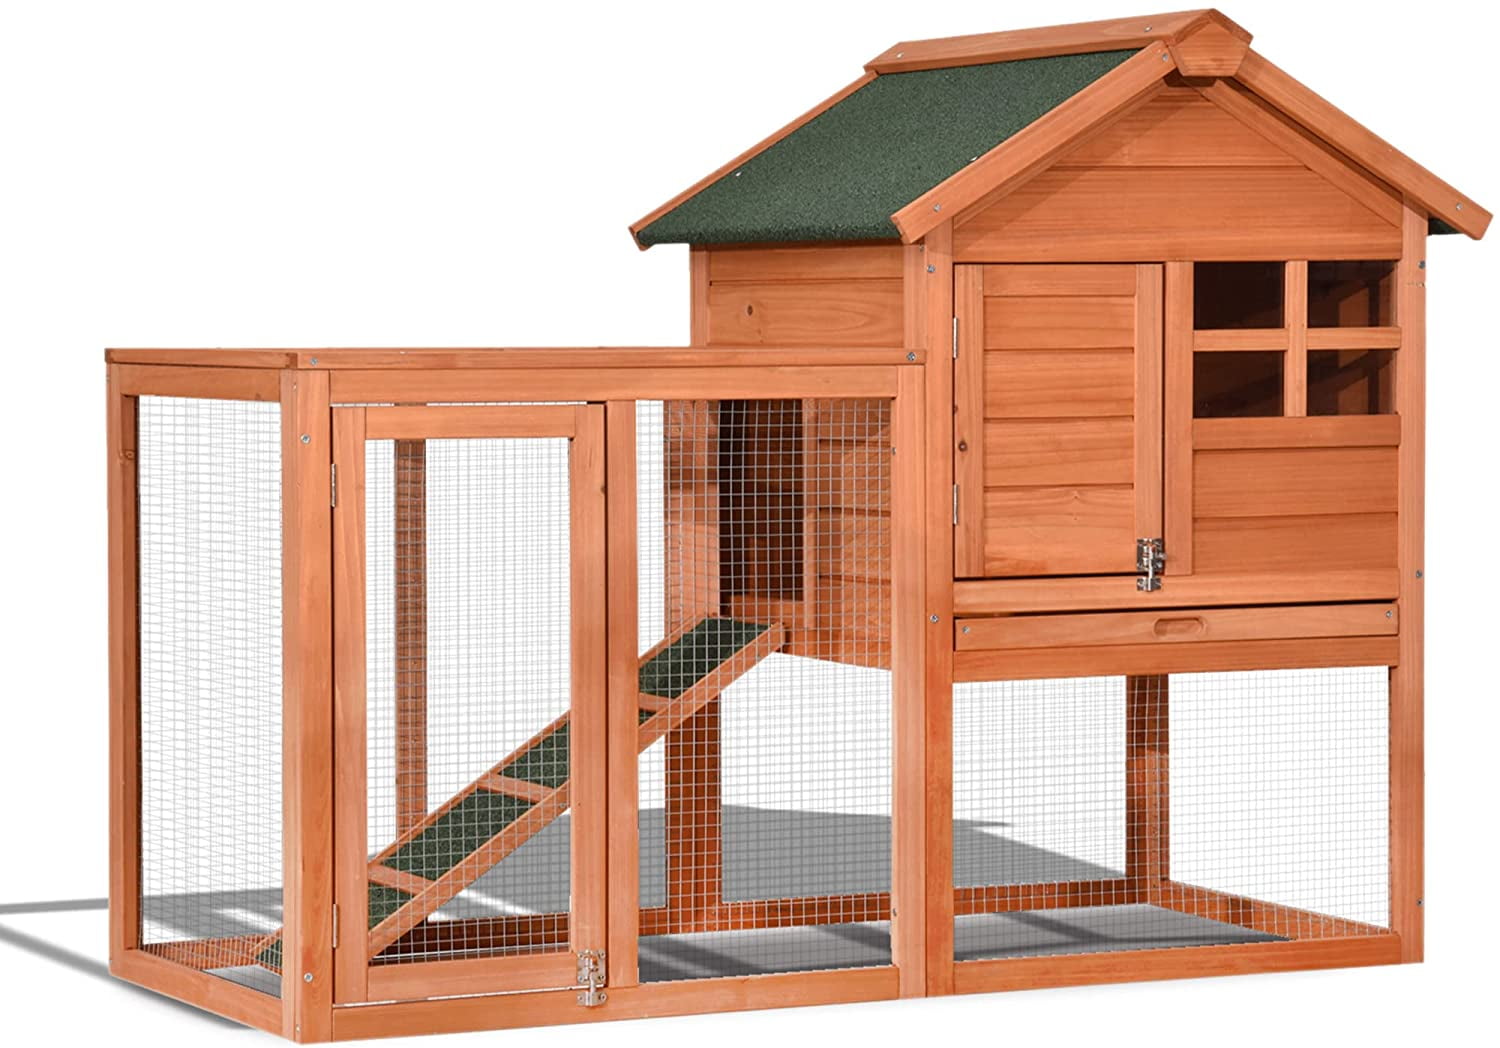 Multi-Level Wood Pet House Nesting Box Outdoor Pens and Hutches for Small Animals Cat Dog Chicken Coop Bunny Cage Poultry Pet Cage with Ladder and Outdoor Run Wooden Rabbit Cage Hutch 